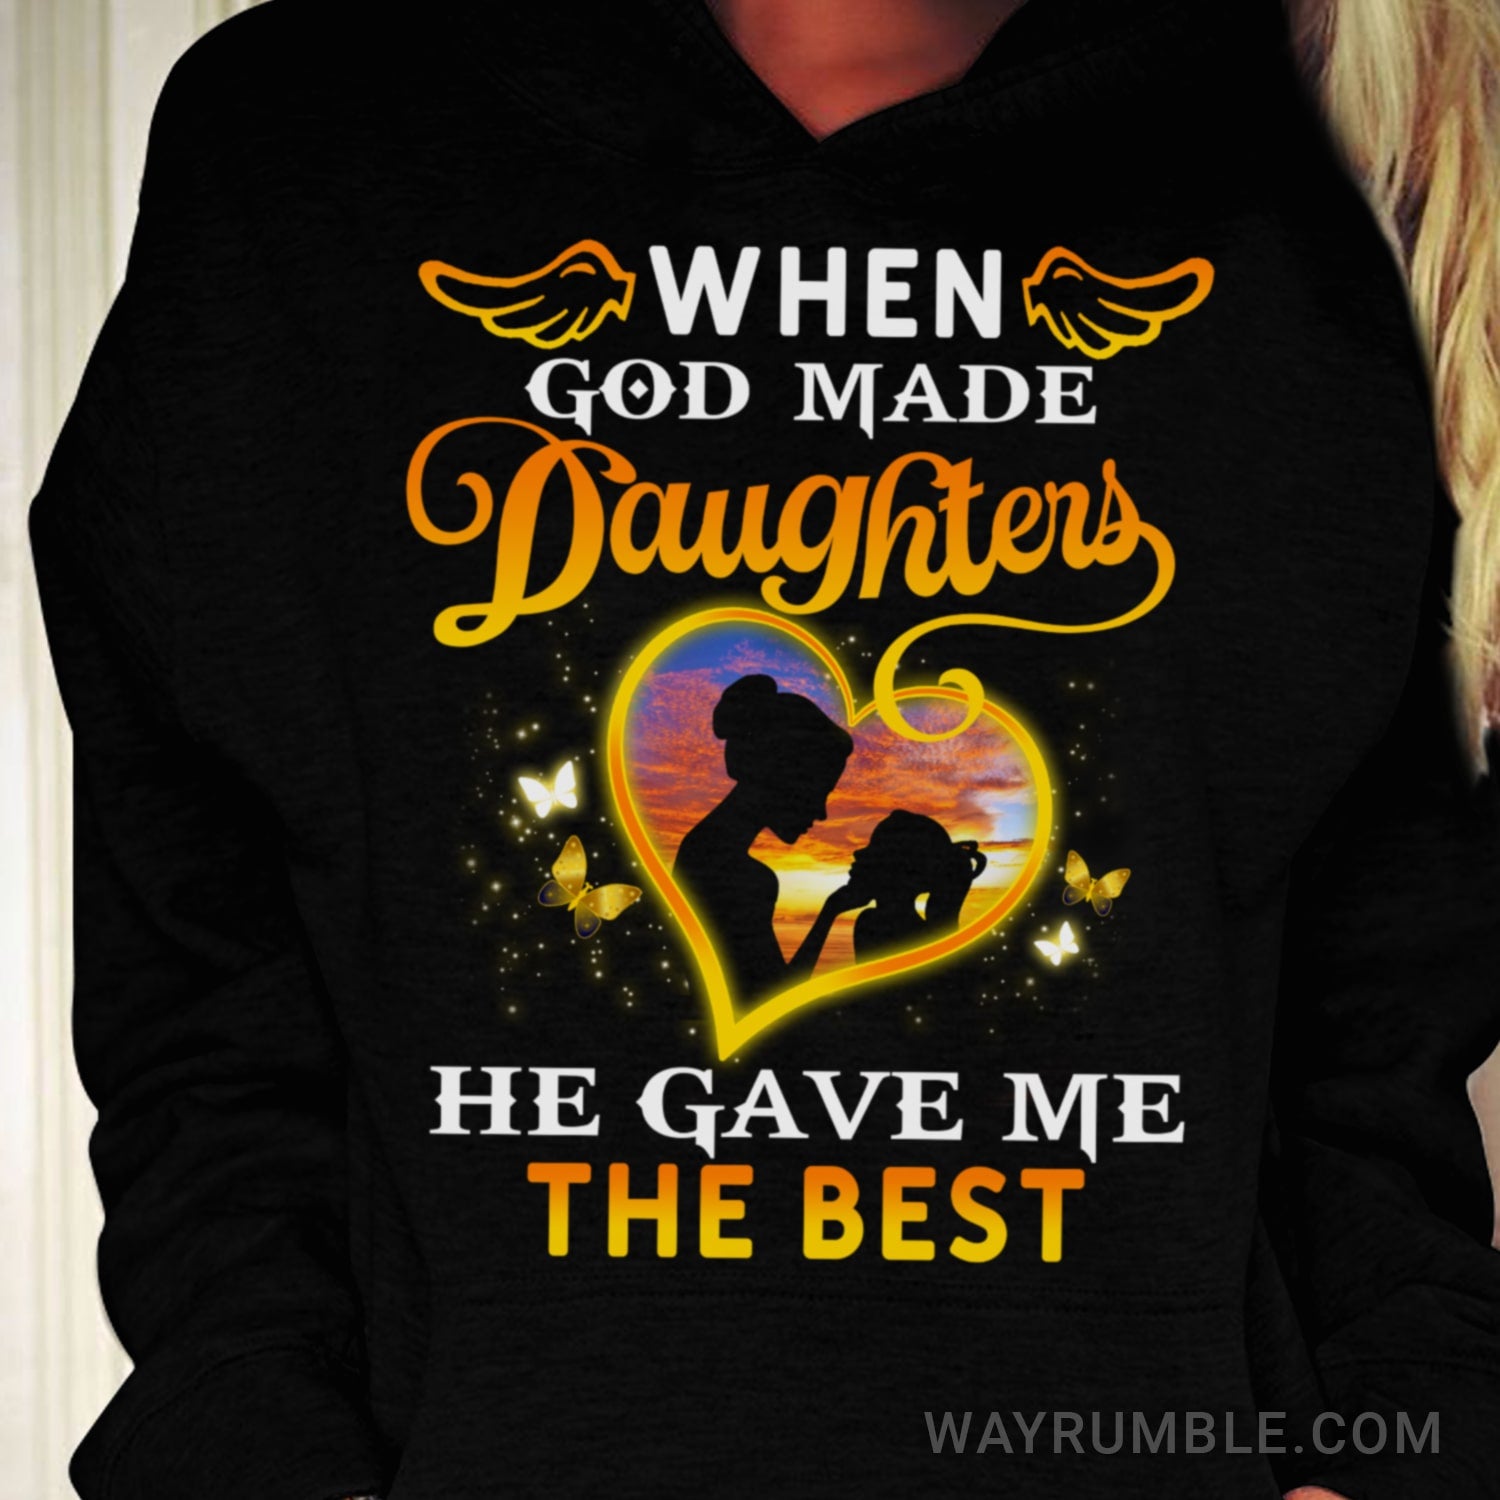 Mom and daughter silhouette, Sunset, When God made daughters, He gave me the best - Family Black Apparel